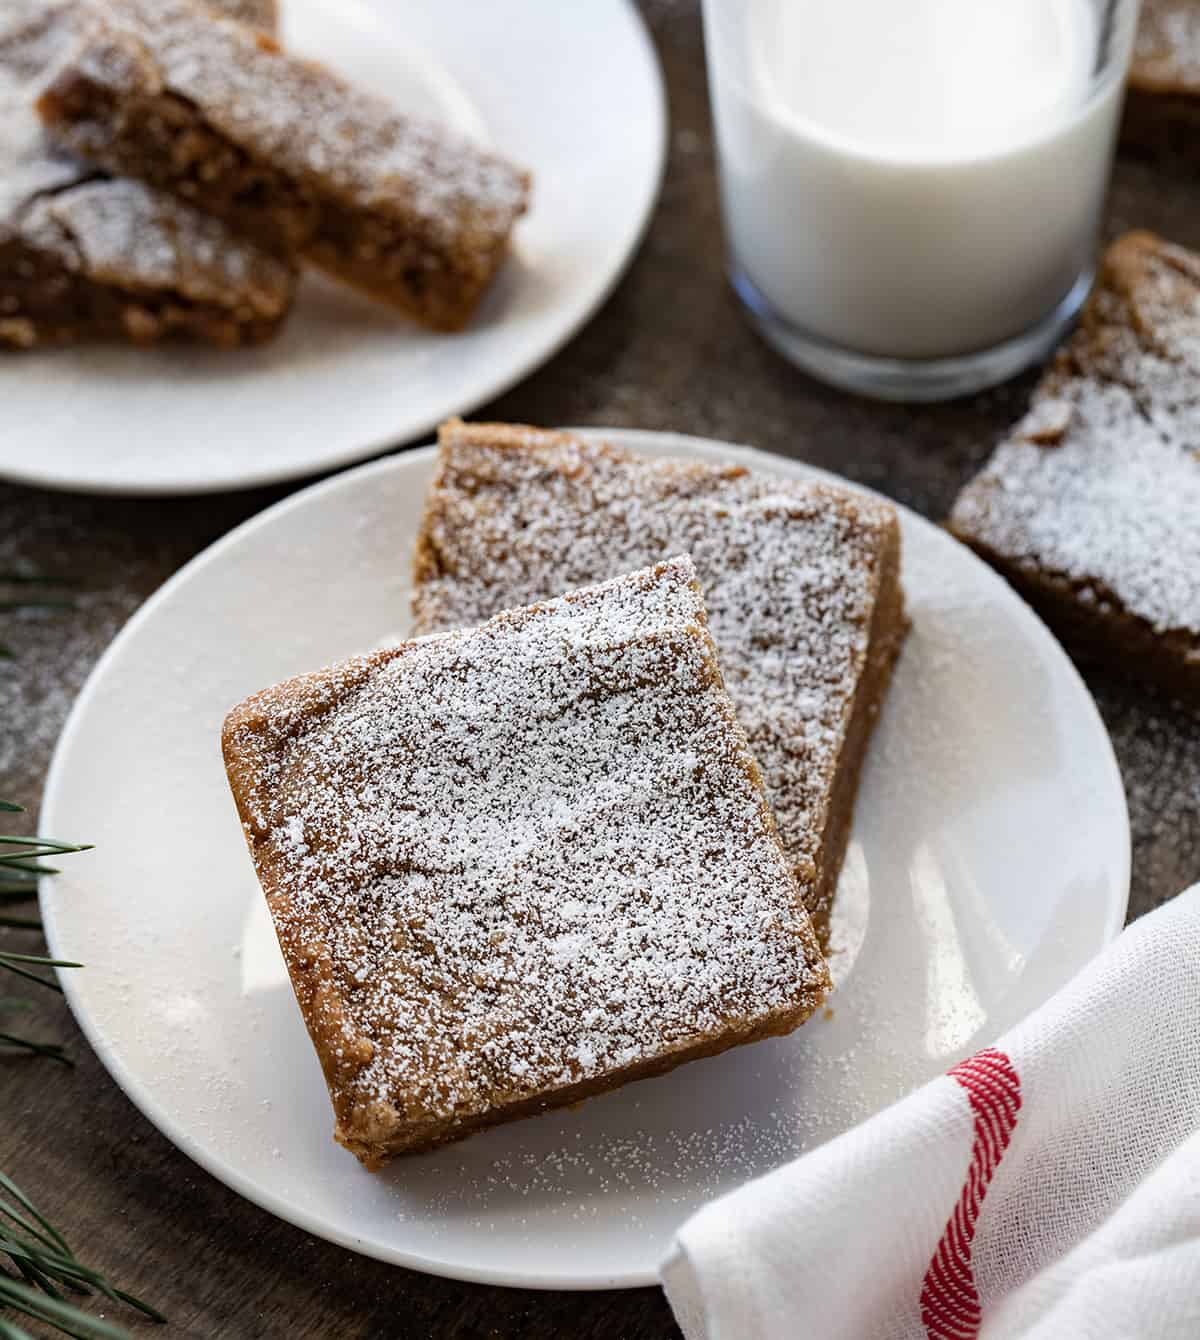 Plate of Gingerbread Brownies on a wooden table with milk.